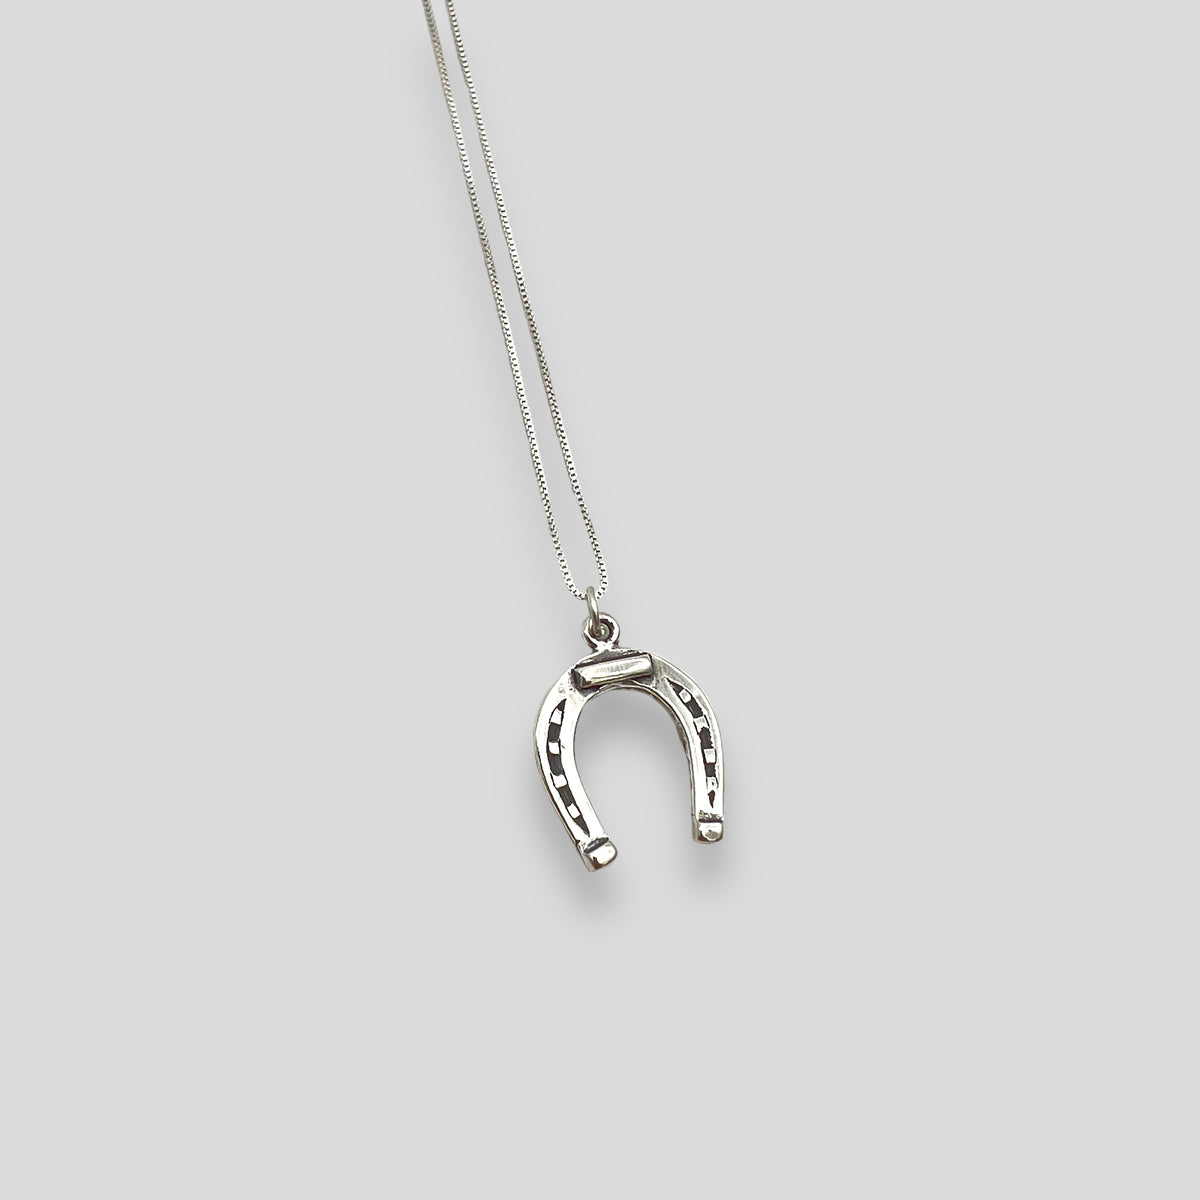 Small Sterling Silver Horseshoe Pendant Necklace